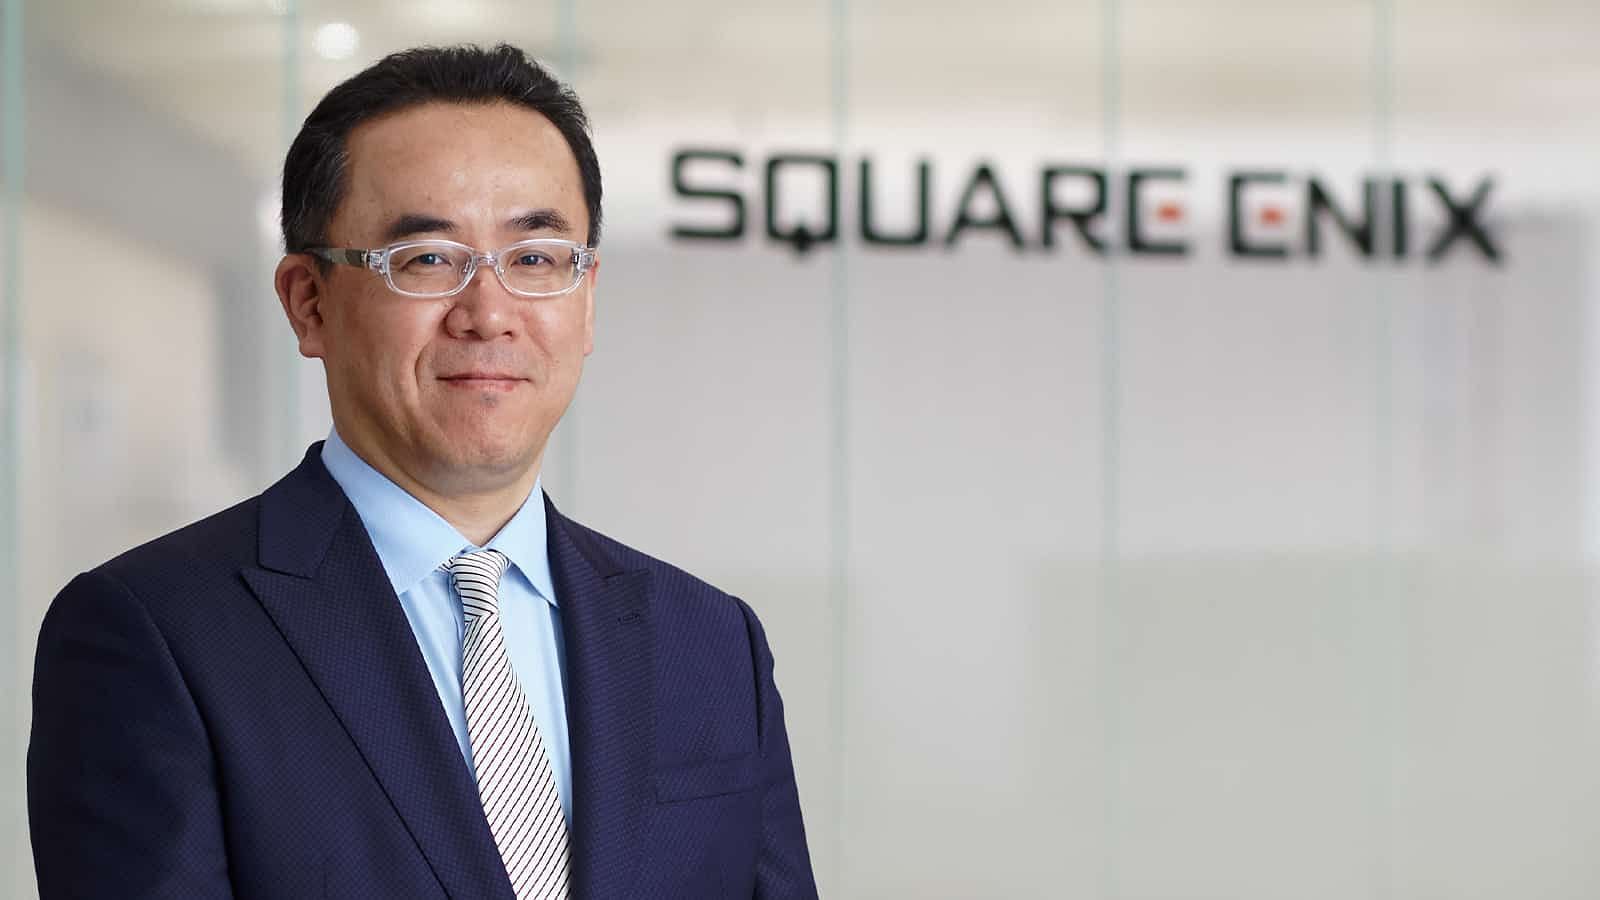 Square Enix fans blast company president for championing NFTs and Blockchain technology (Image via Square Enix)